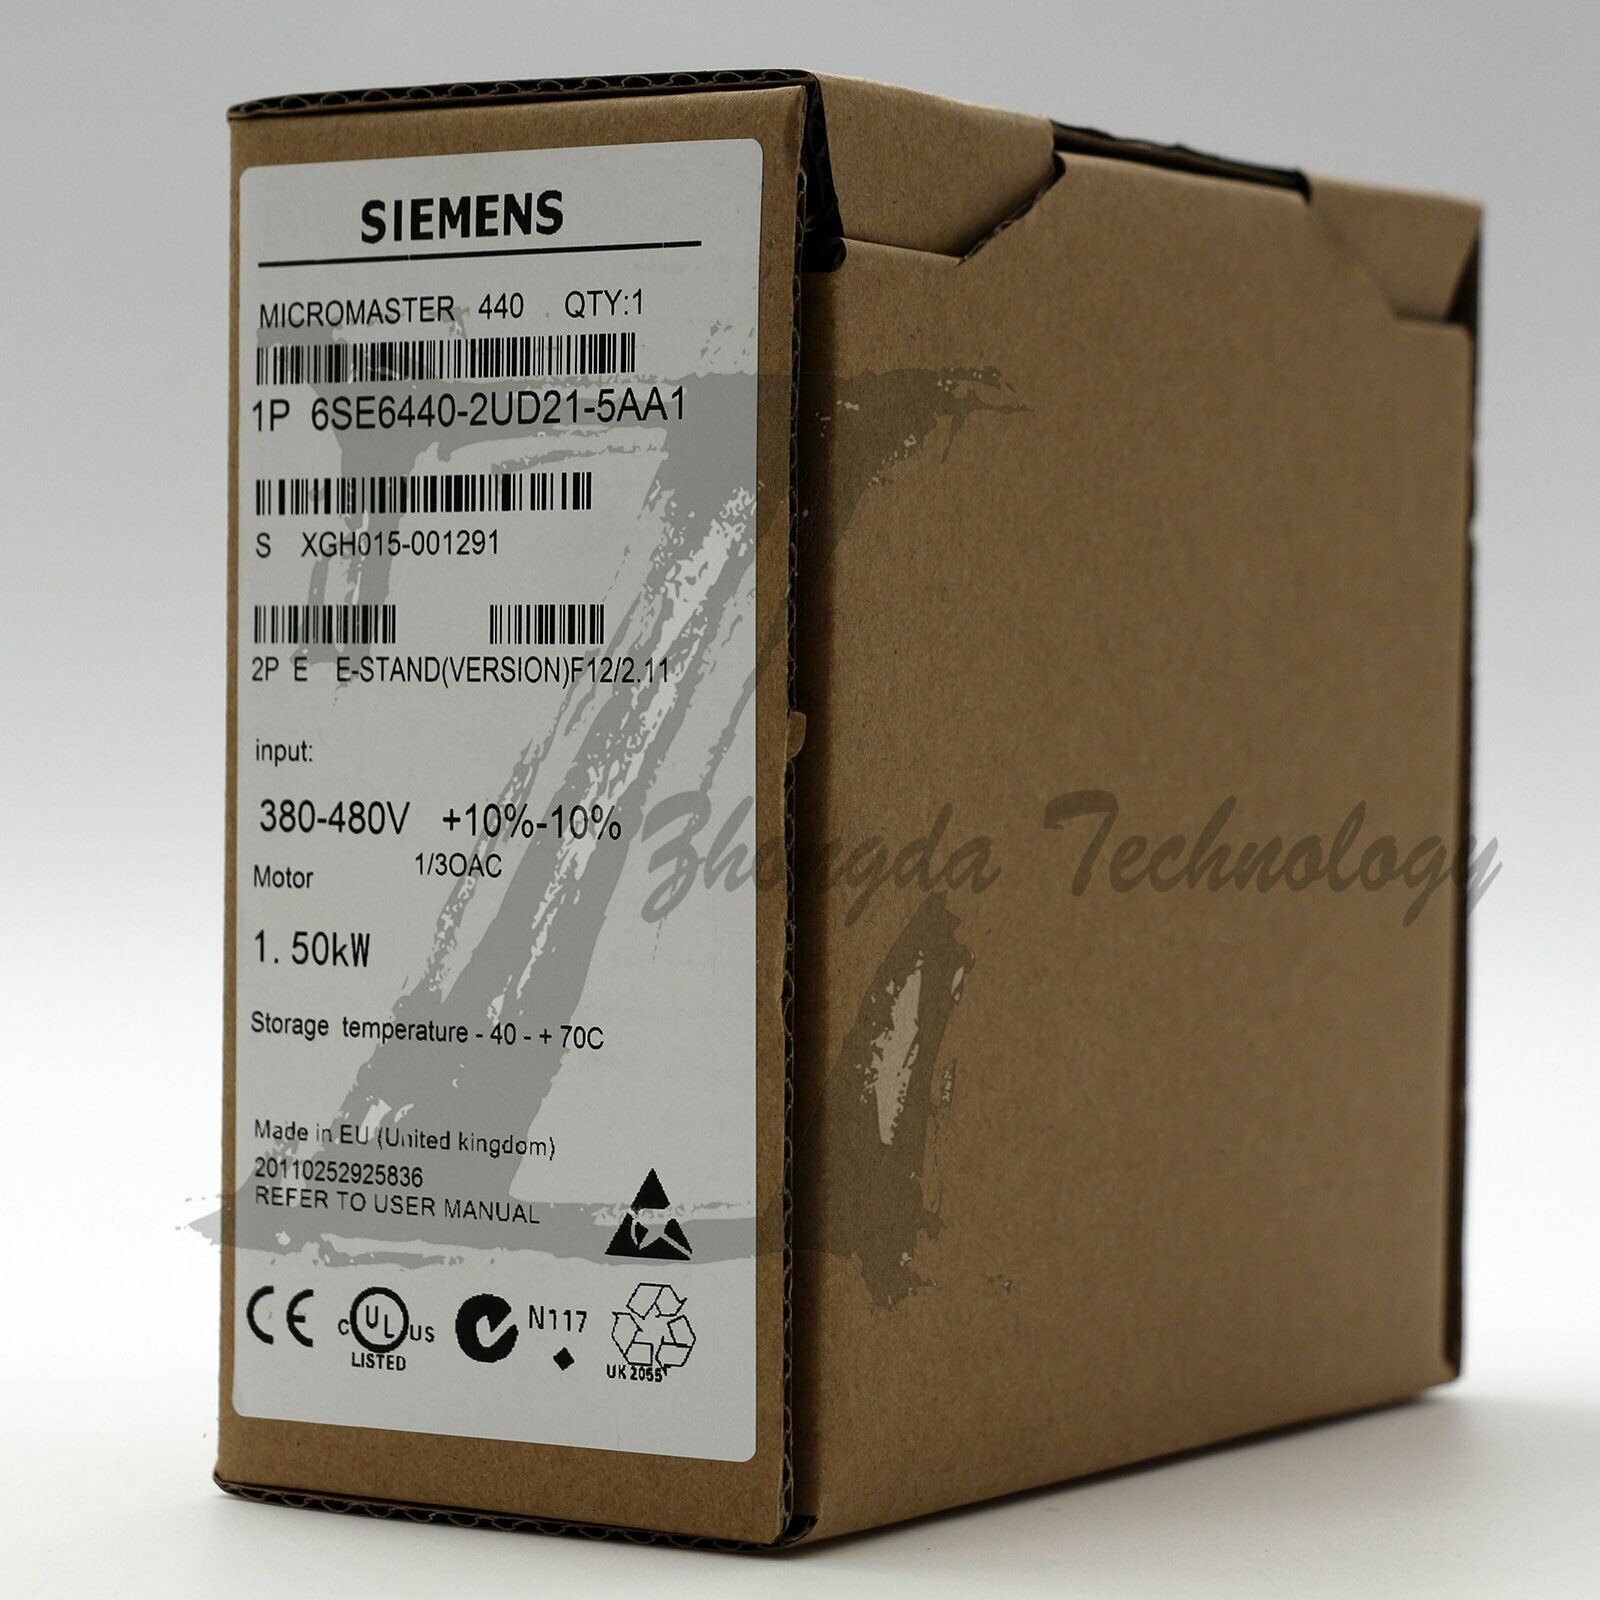 NEW Siemens Inverter Drive，1.5 kW，380 to 480 V ac，6SE6440-2UD21-5AA1